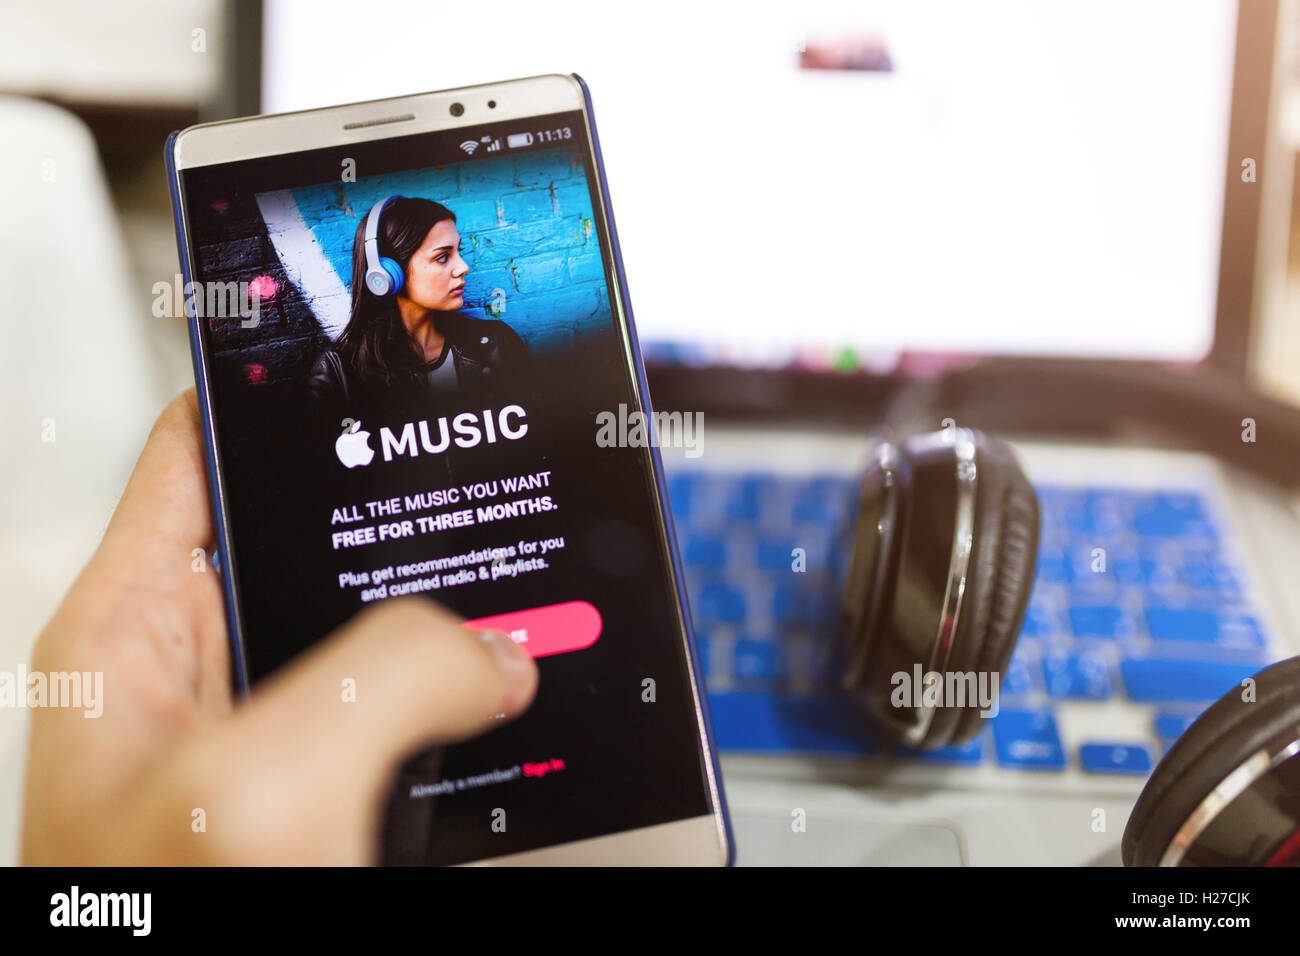 CHIANG MAI,THAILAND - Sept 25,2016: A man hand holding screen shot of Apple music app showing on Android. Apple Music is the new Stock Photo